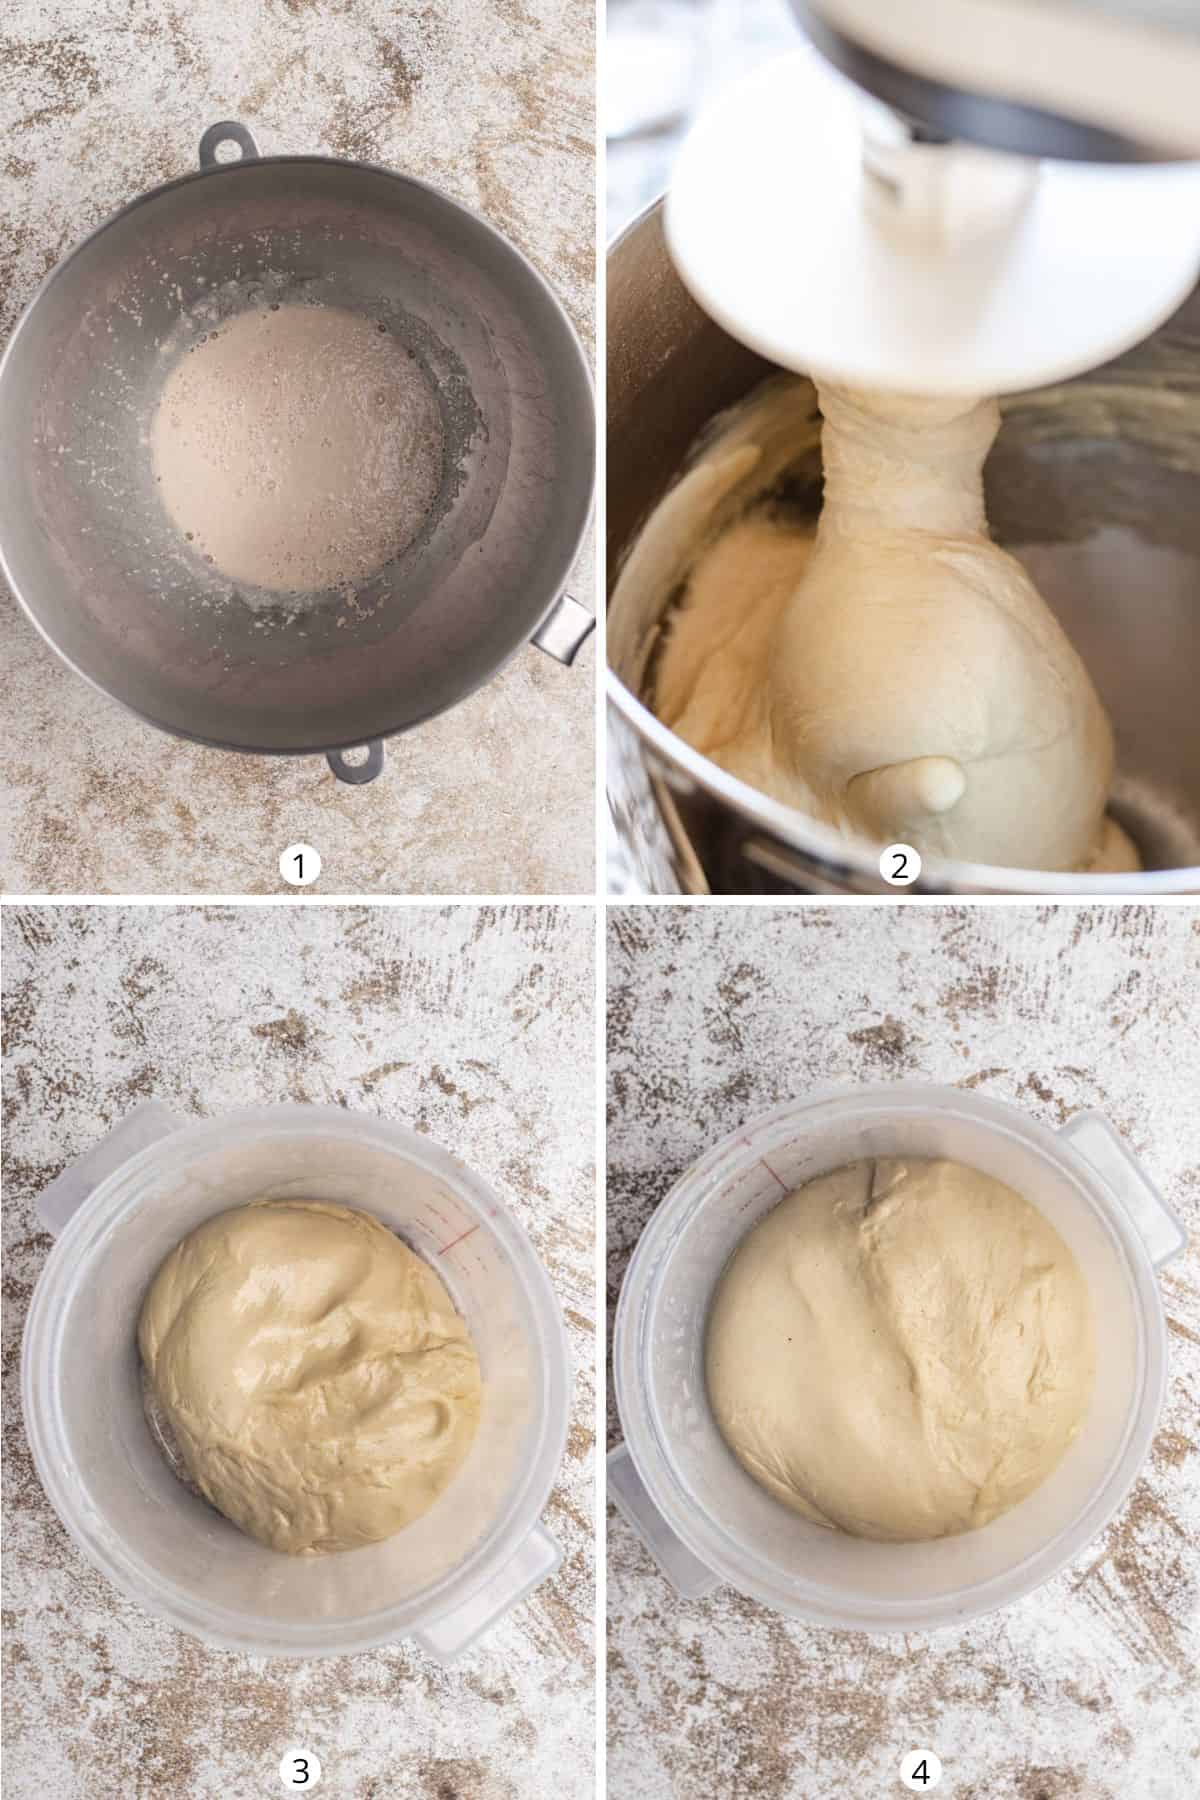 Making the bread dough using a stand mixer and proofing the dough in a large plastic container.